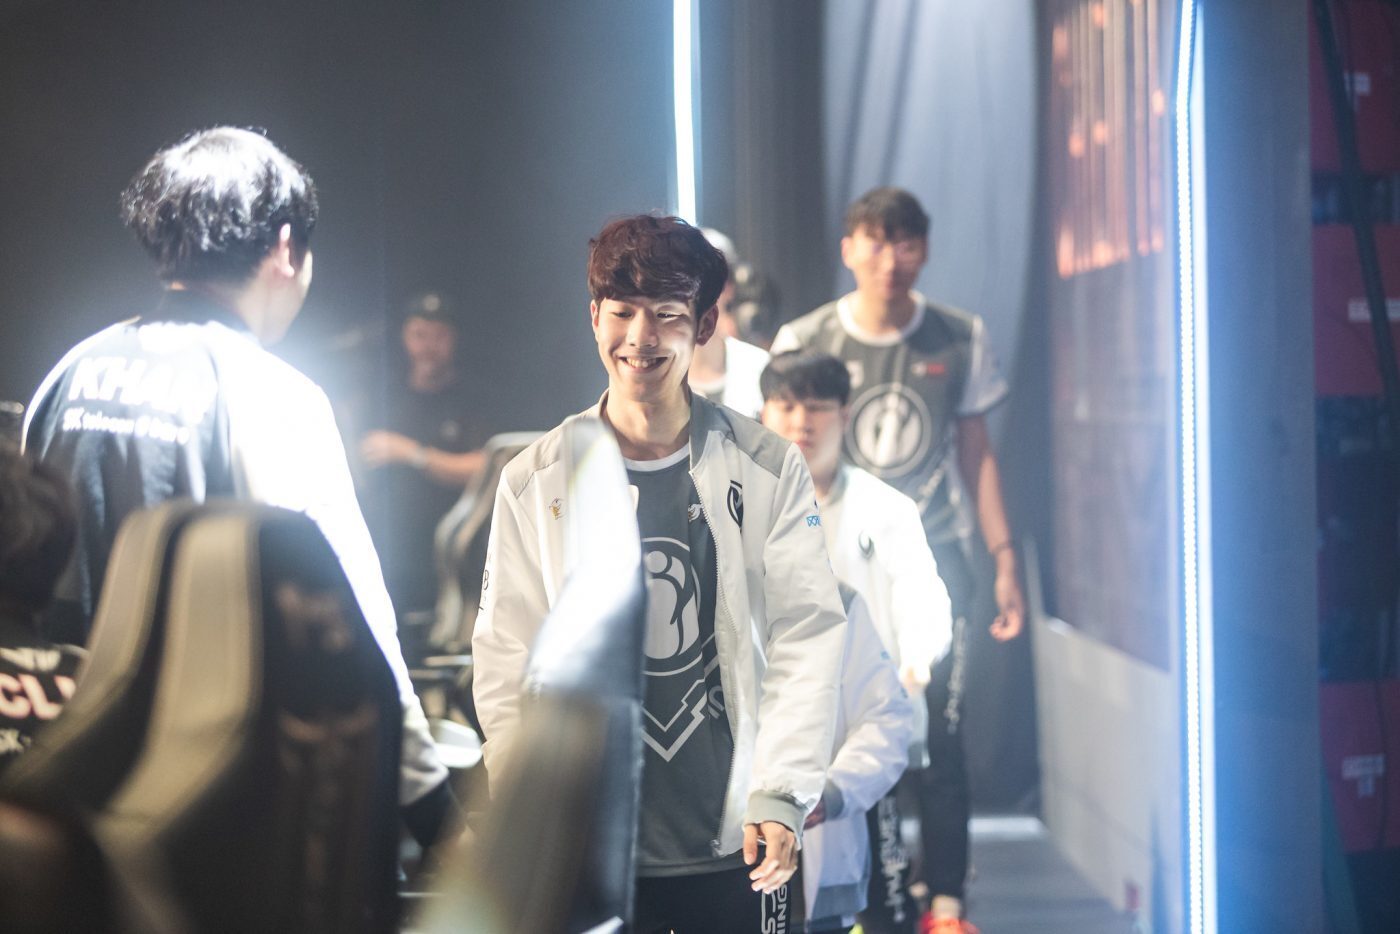 Seung-lok “TheShy” Kang and defending world champions Invictus Gaming sealed a 4-0 start to the Mid-Season Invitational with a record-breaking win over Korean representatives SK Telecom T1. (Photo by David Lee/Riot Games)